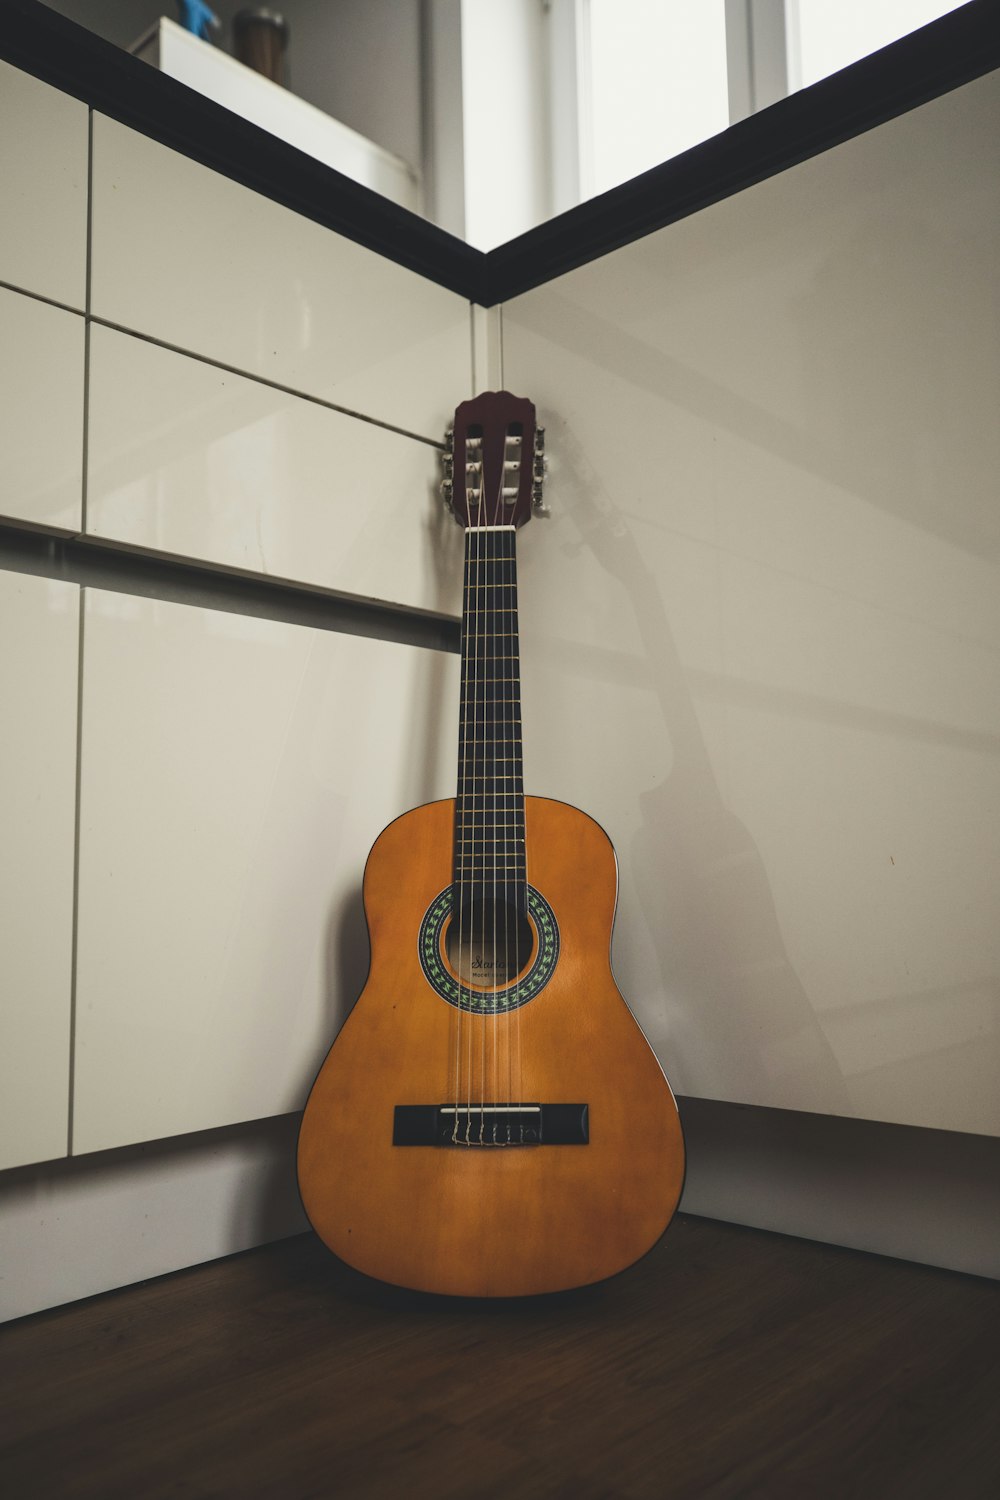 a guitar sitting on the floor in front of a mirror